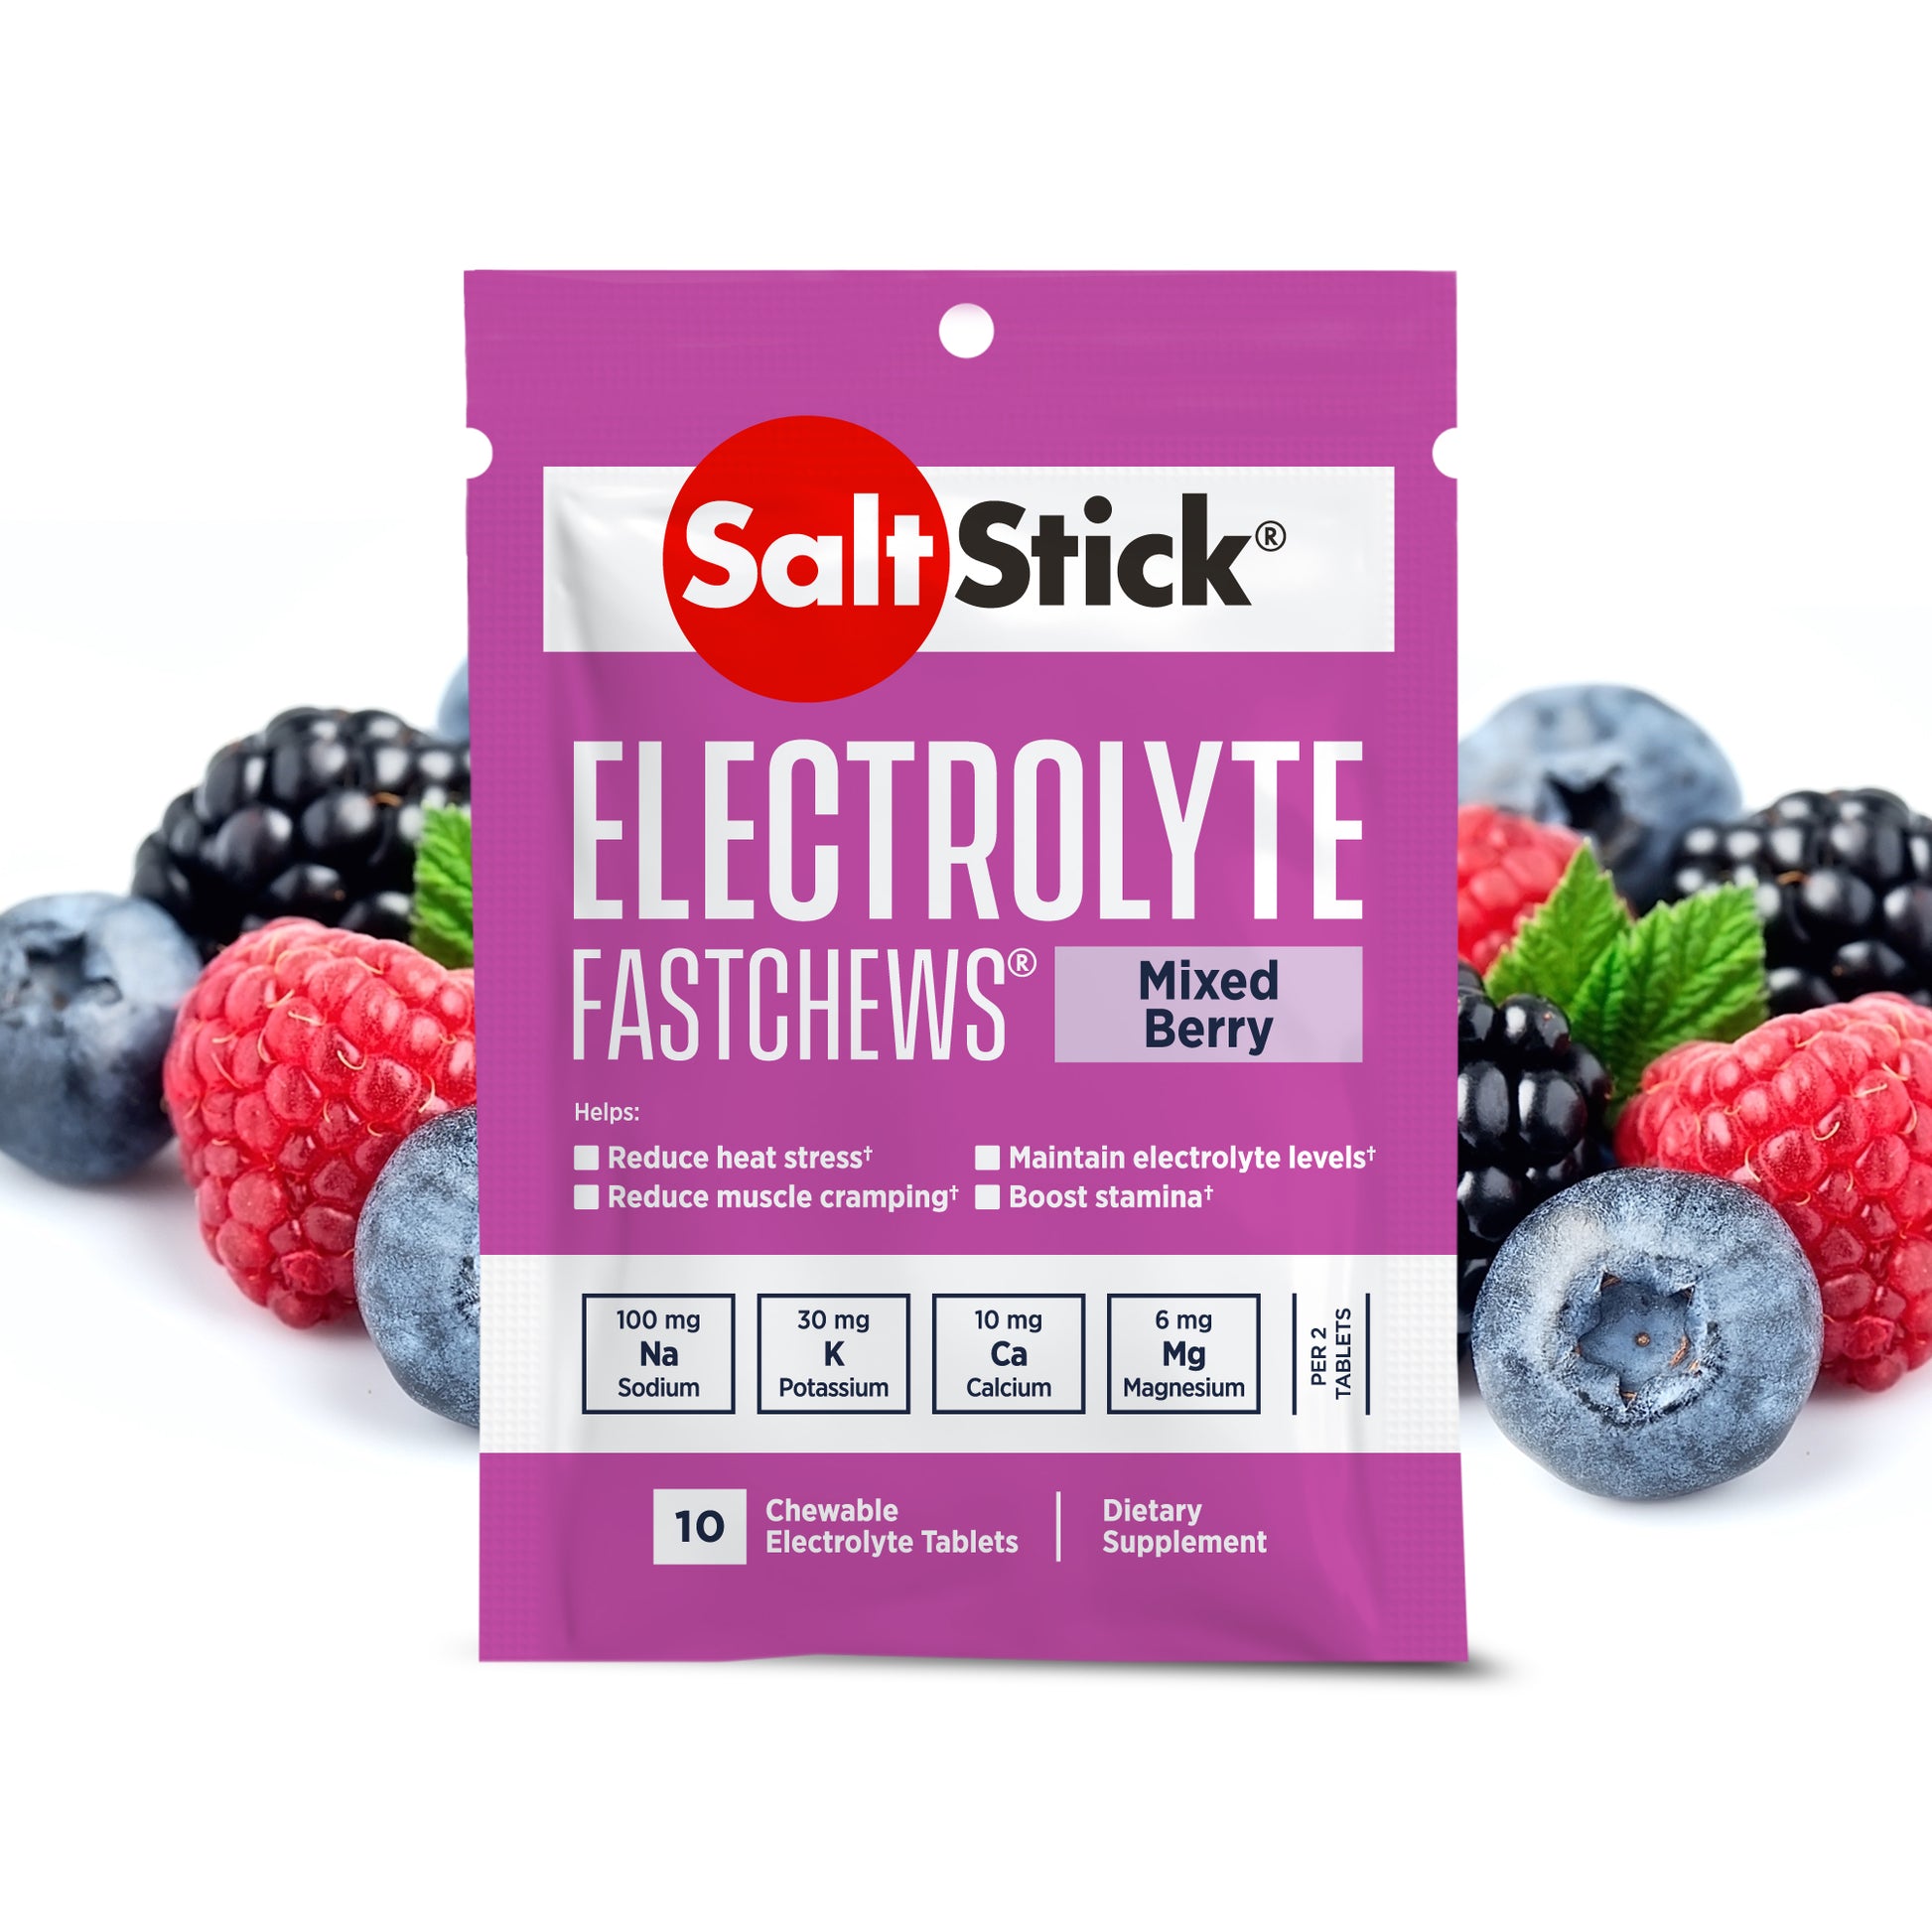 SaltStick FastChews Chewable Electrolyte Tablets Mixed Berry Packet of 10